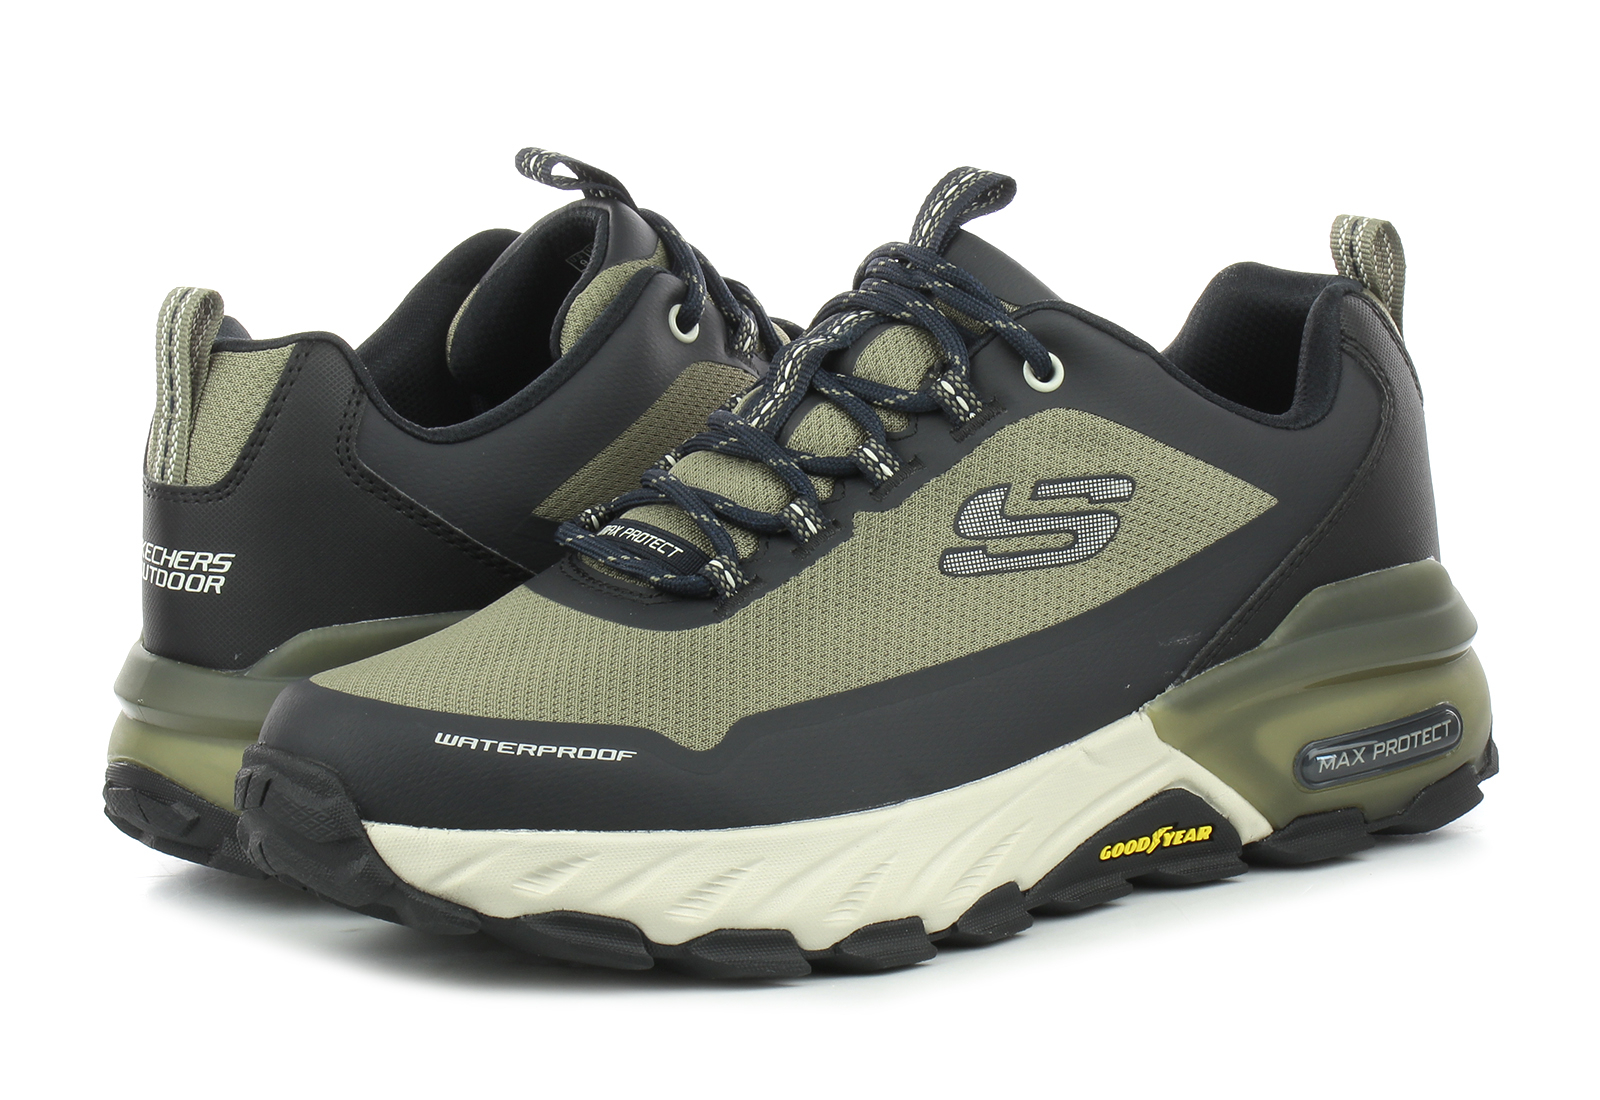 Skechers Sneaker Max Protect - Fast T